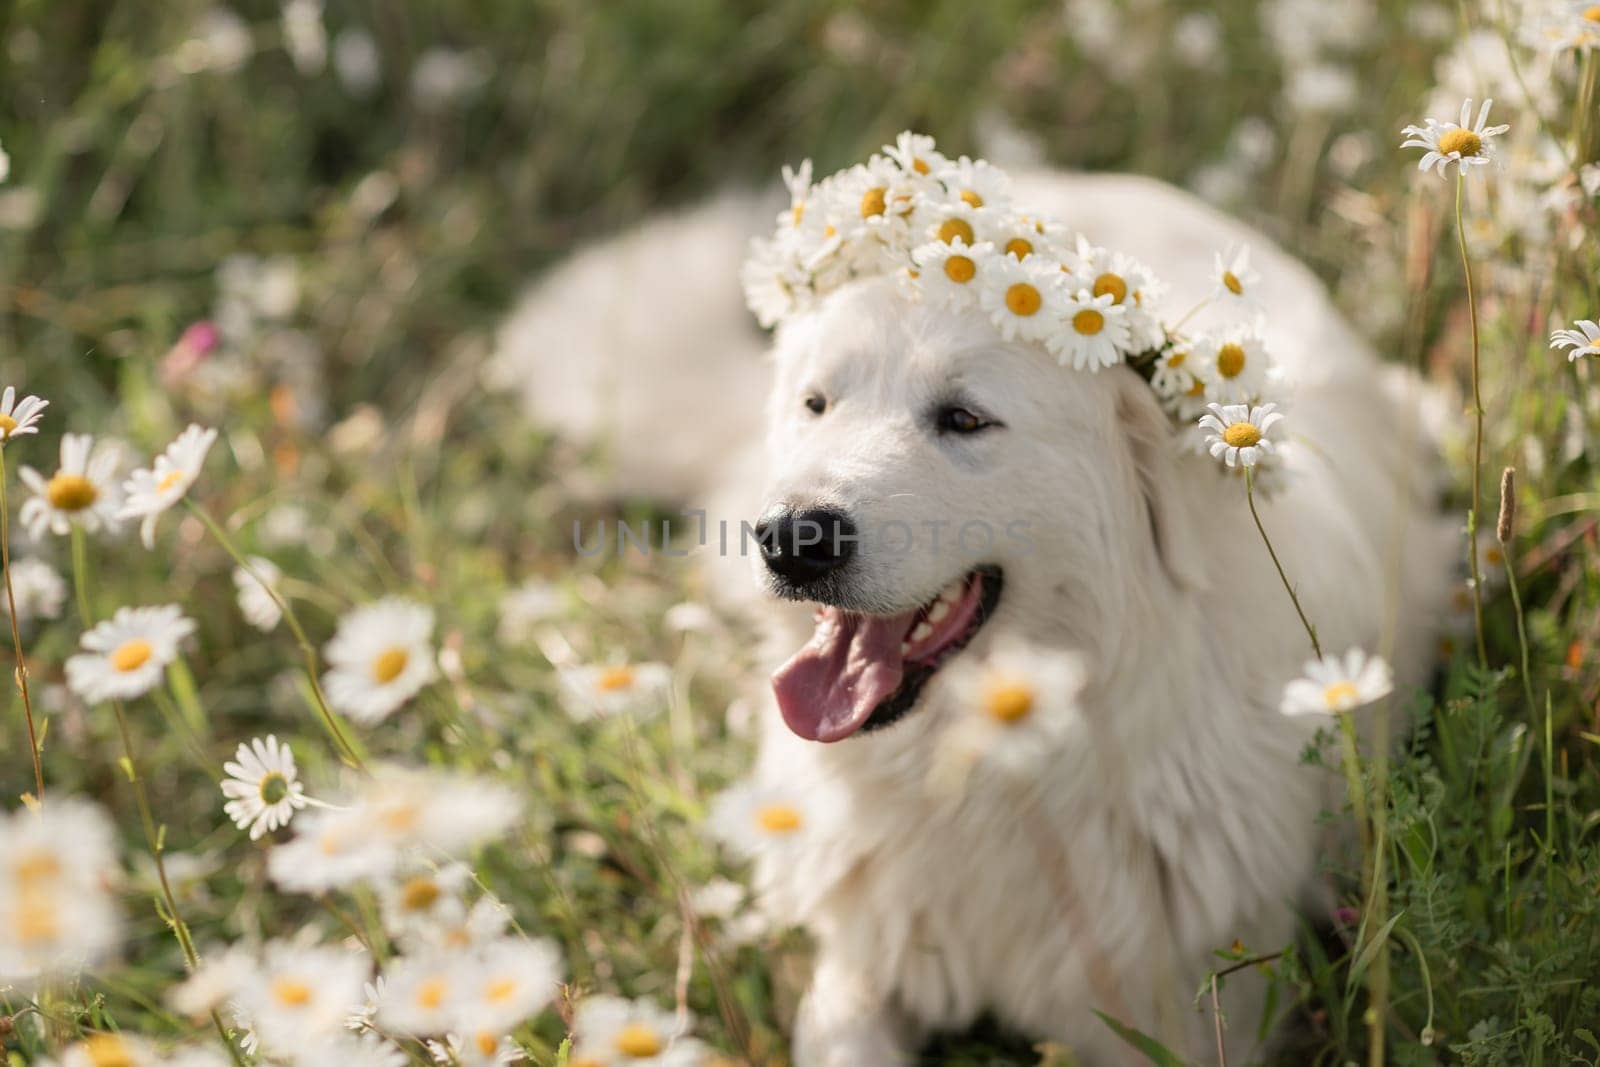 Daisies Maremma Sheepdog in a wreath of daisies sits on a green lawn with wild flowers daisies, walks a pet. Cute photo with a dog in a wreath of daisies